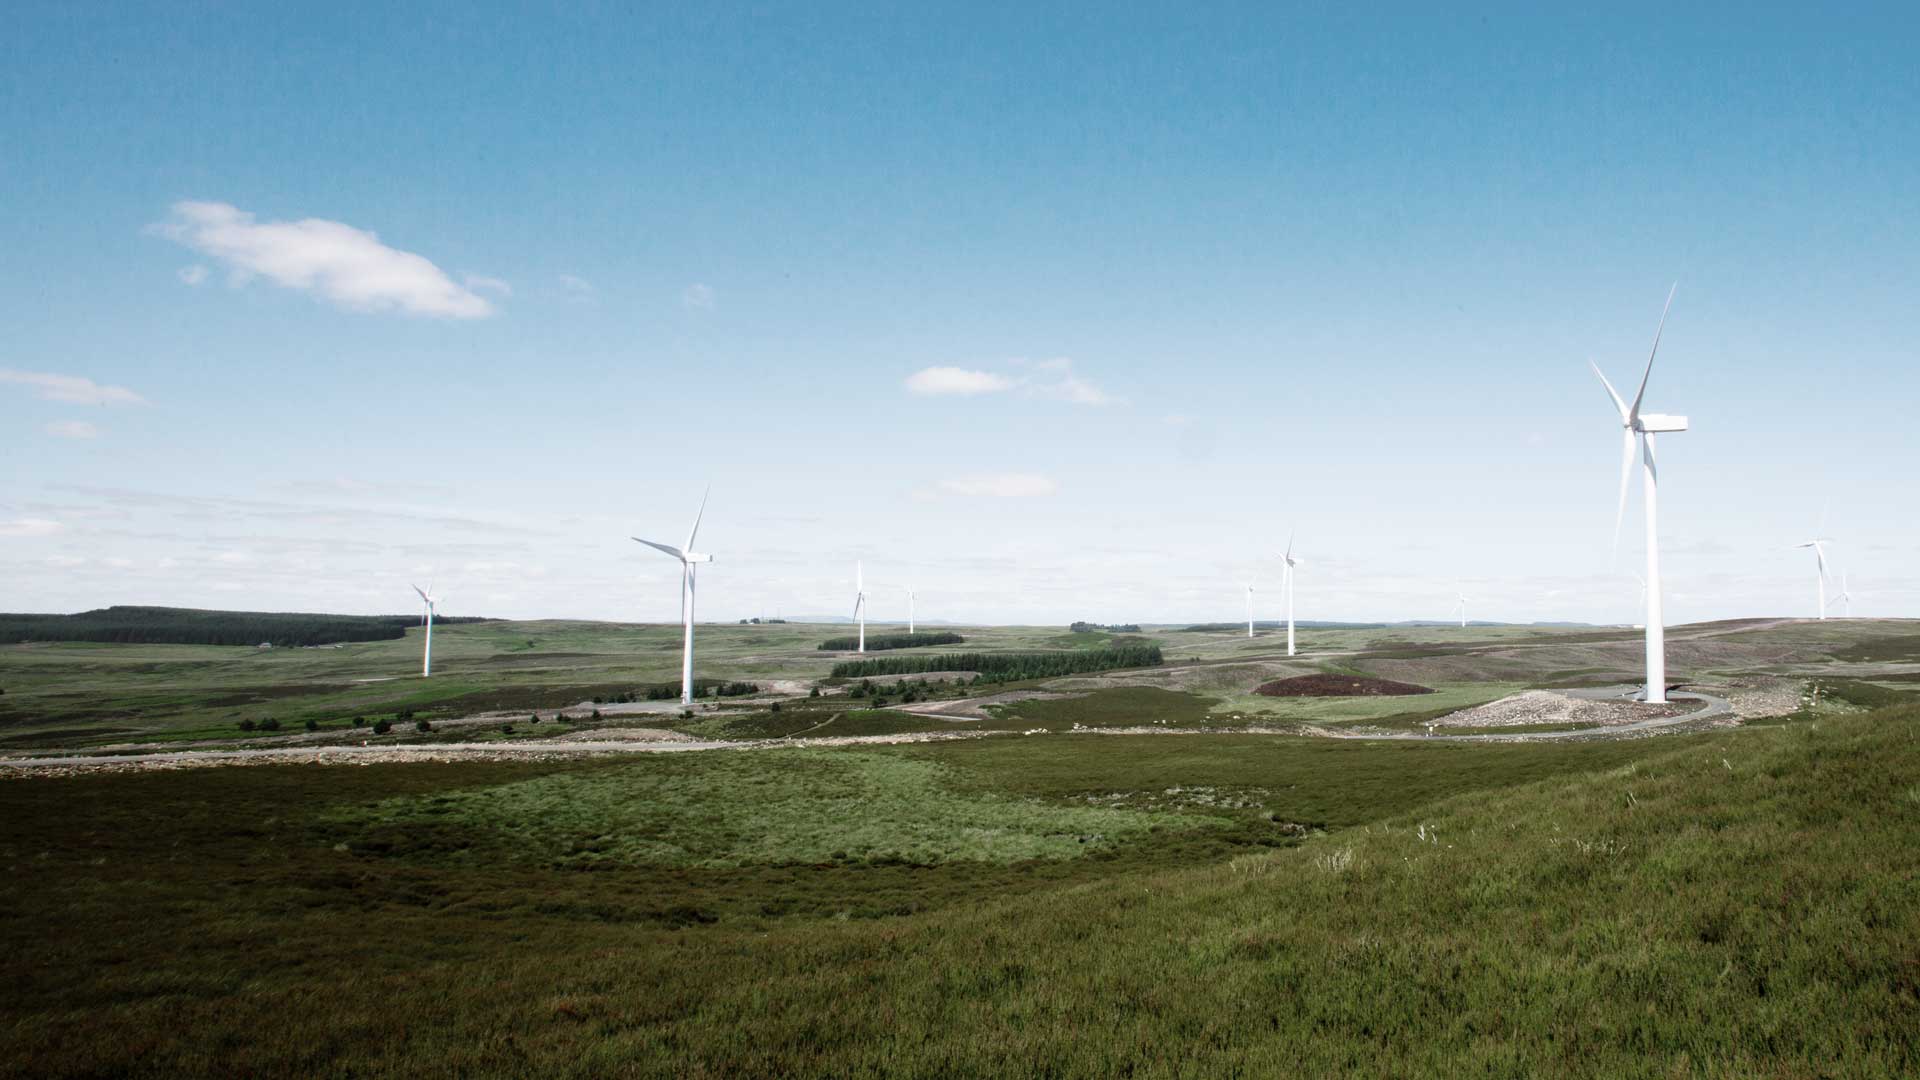 The Ray wind farm in the UK